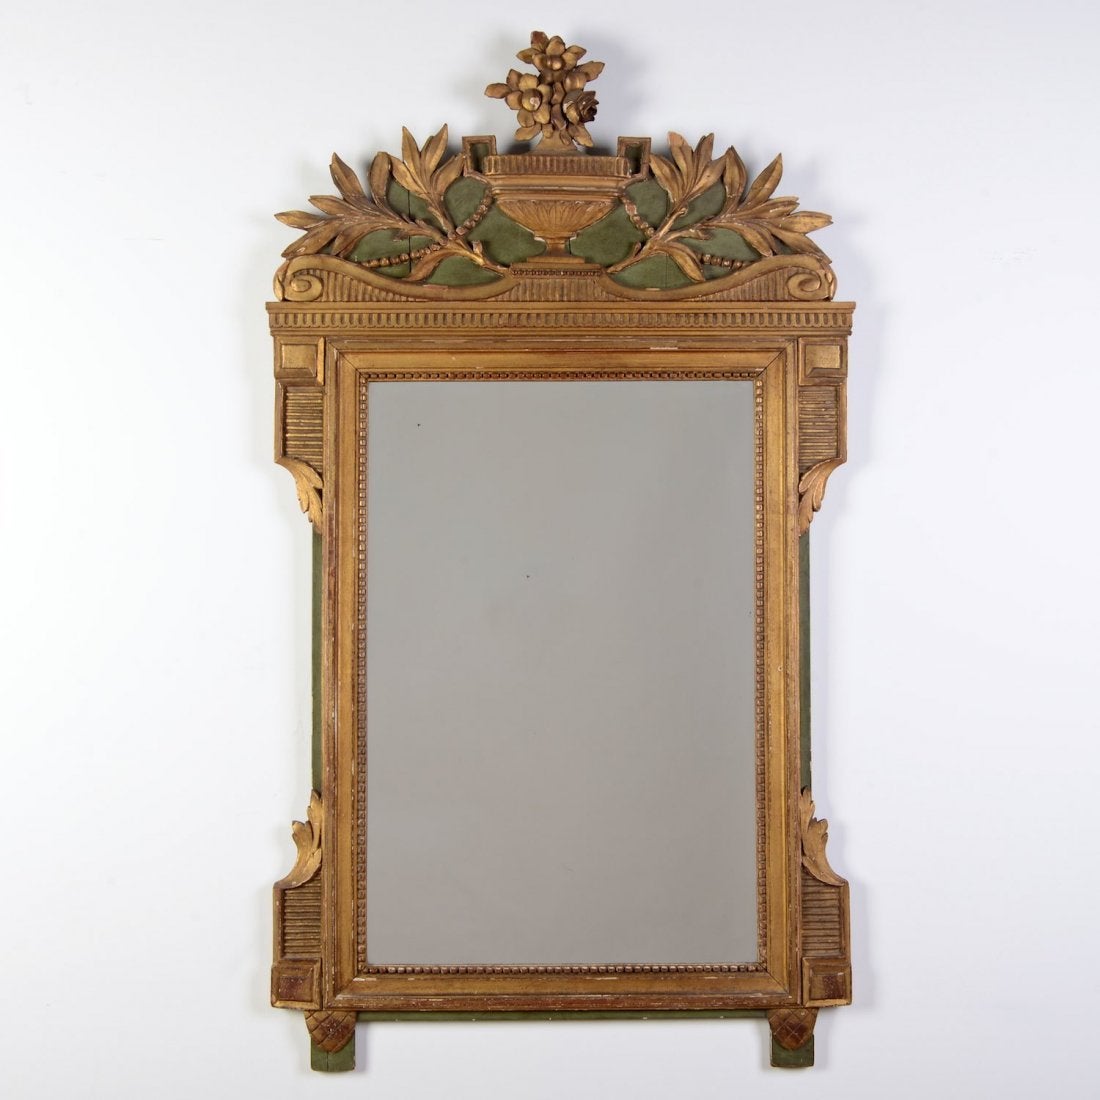 Continental Neoclassical Gilt, Green Painted Mirror, 19th Century, flowering urn and laurel sprig crest